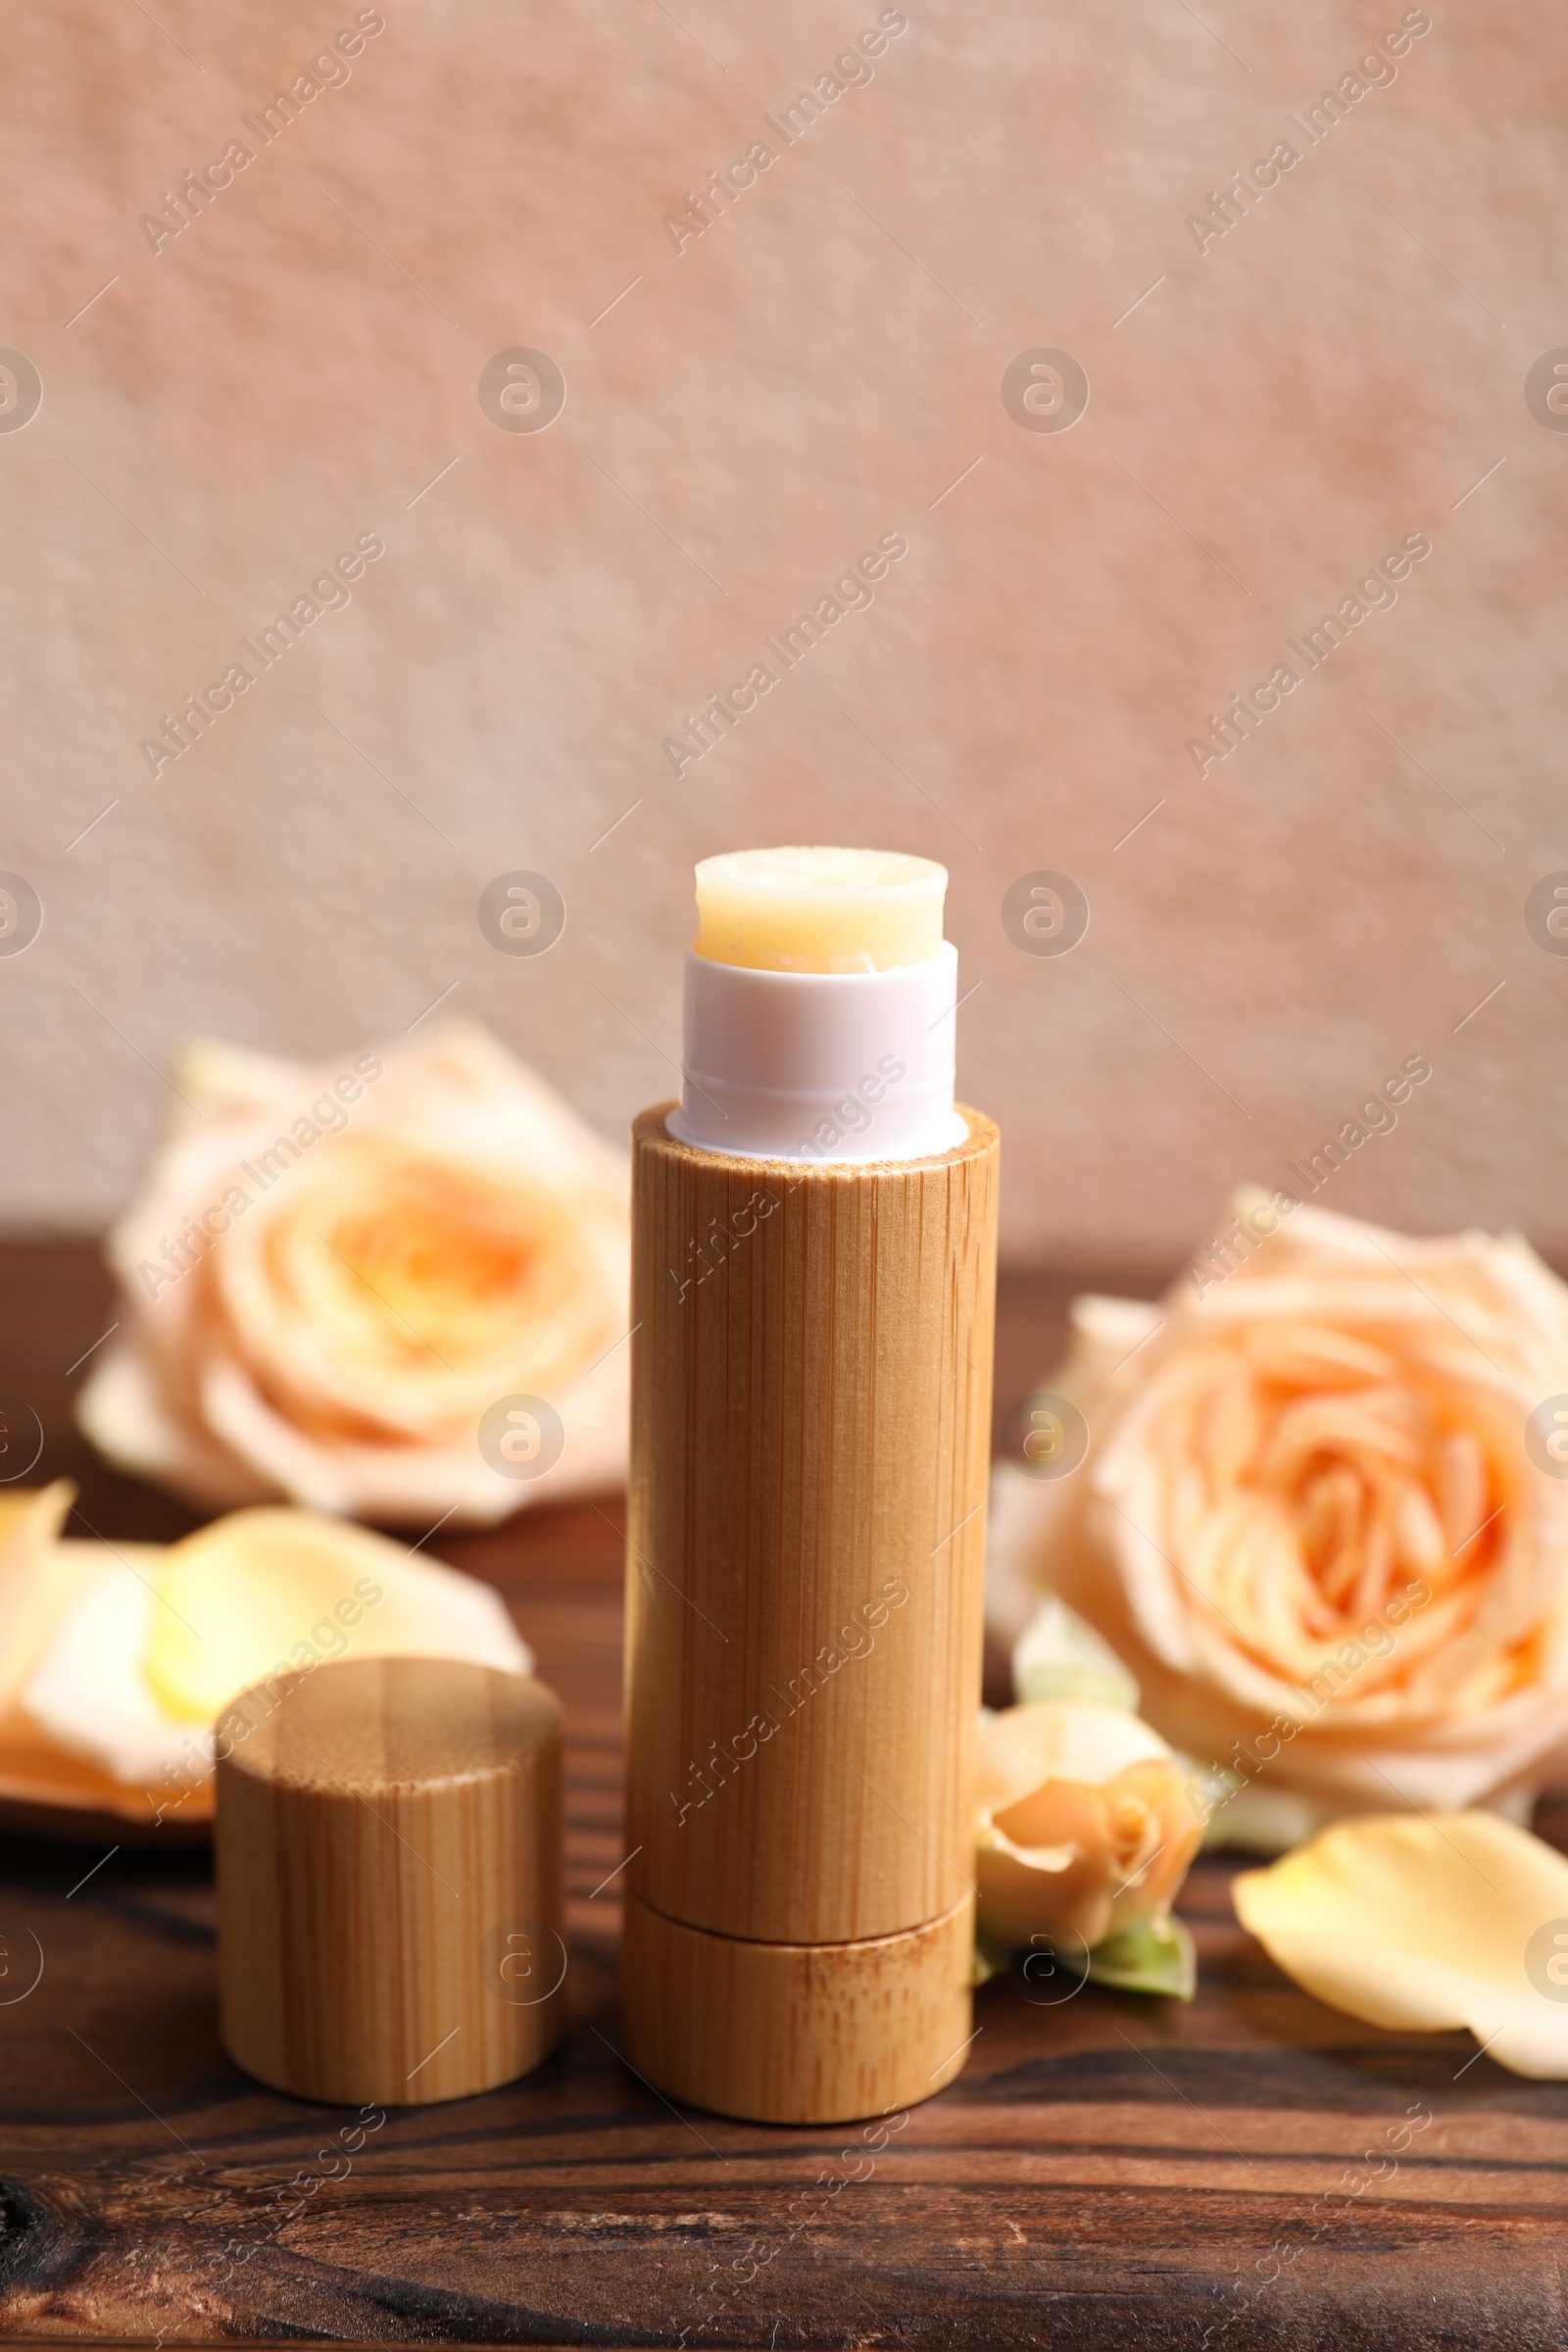 Photo of Lip balm and rose flowers on wooden table, closeup